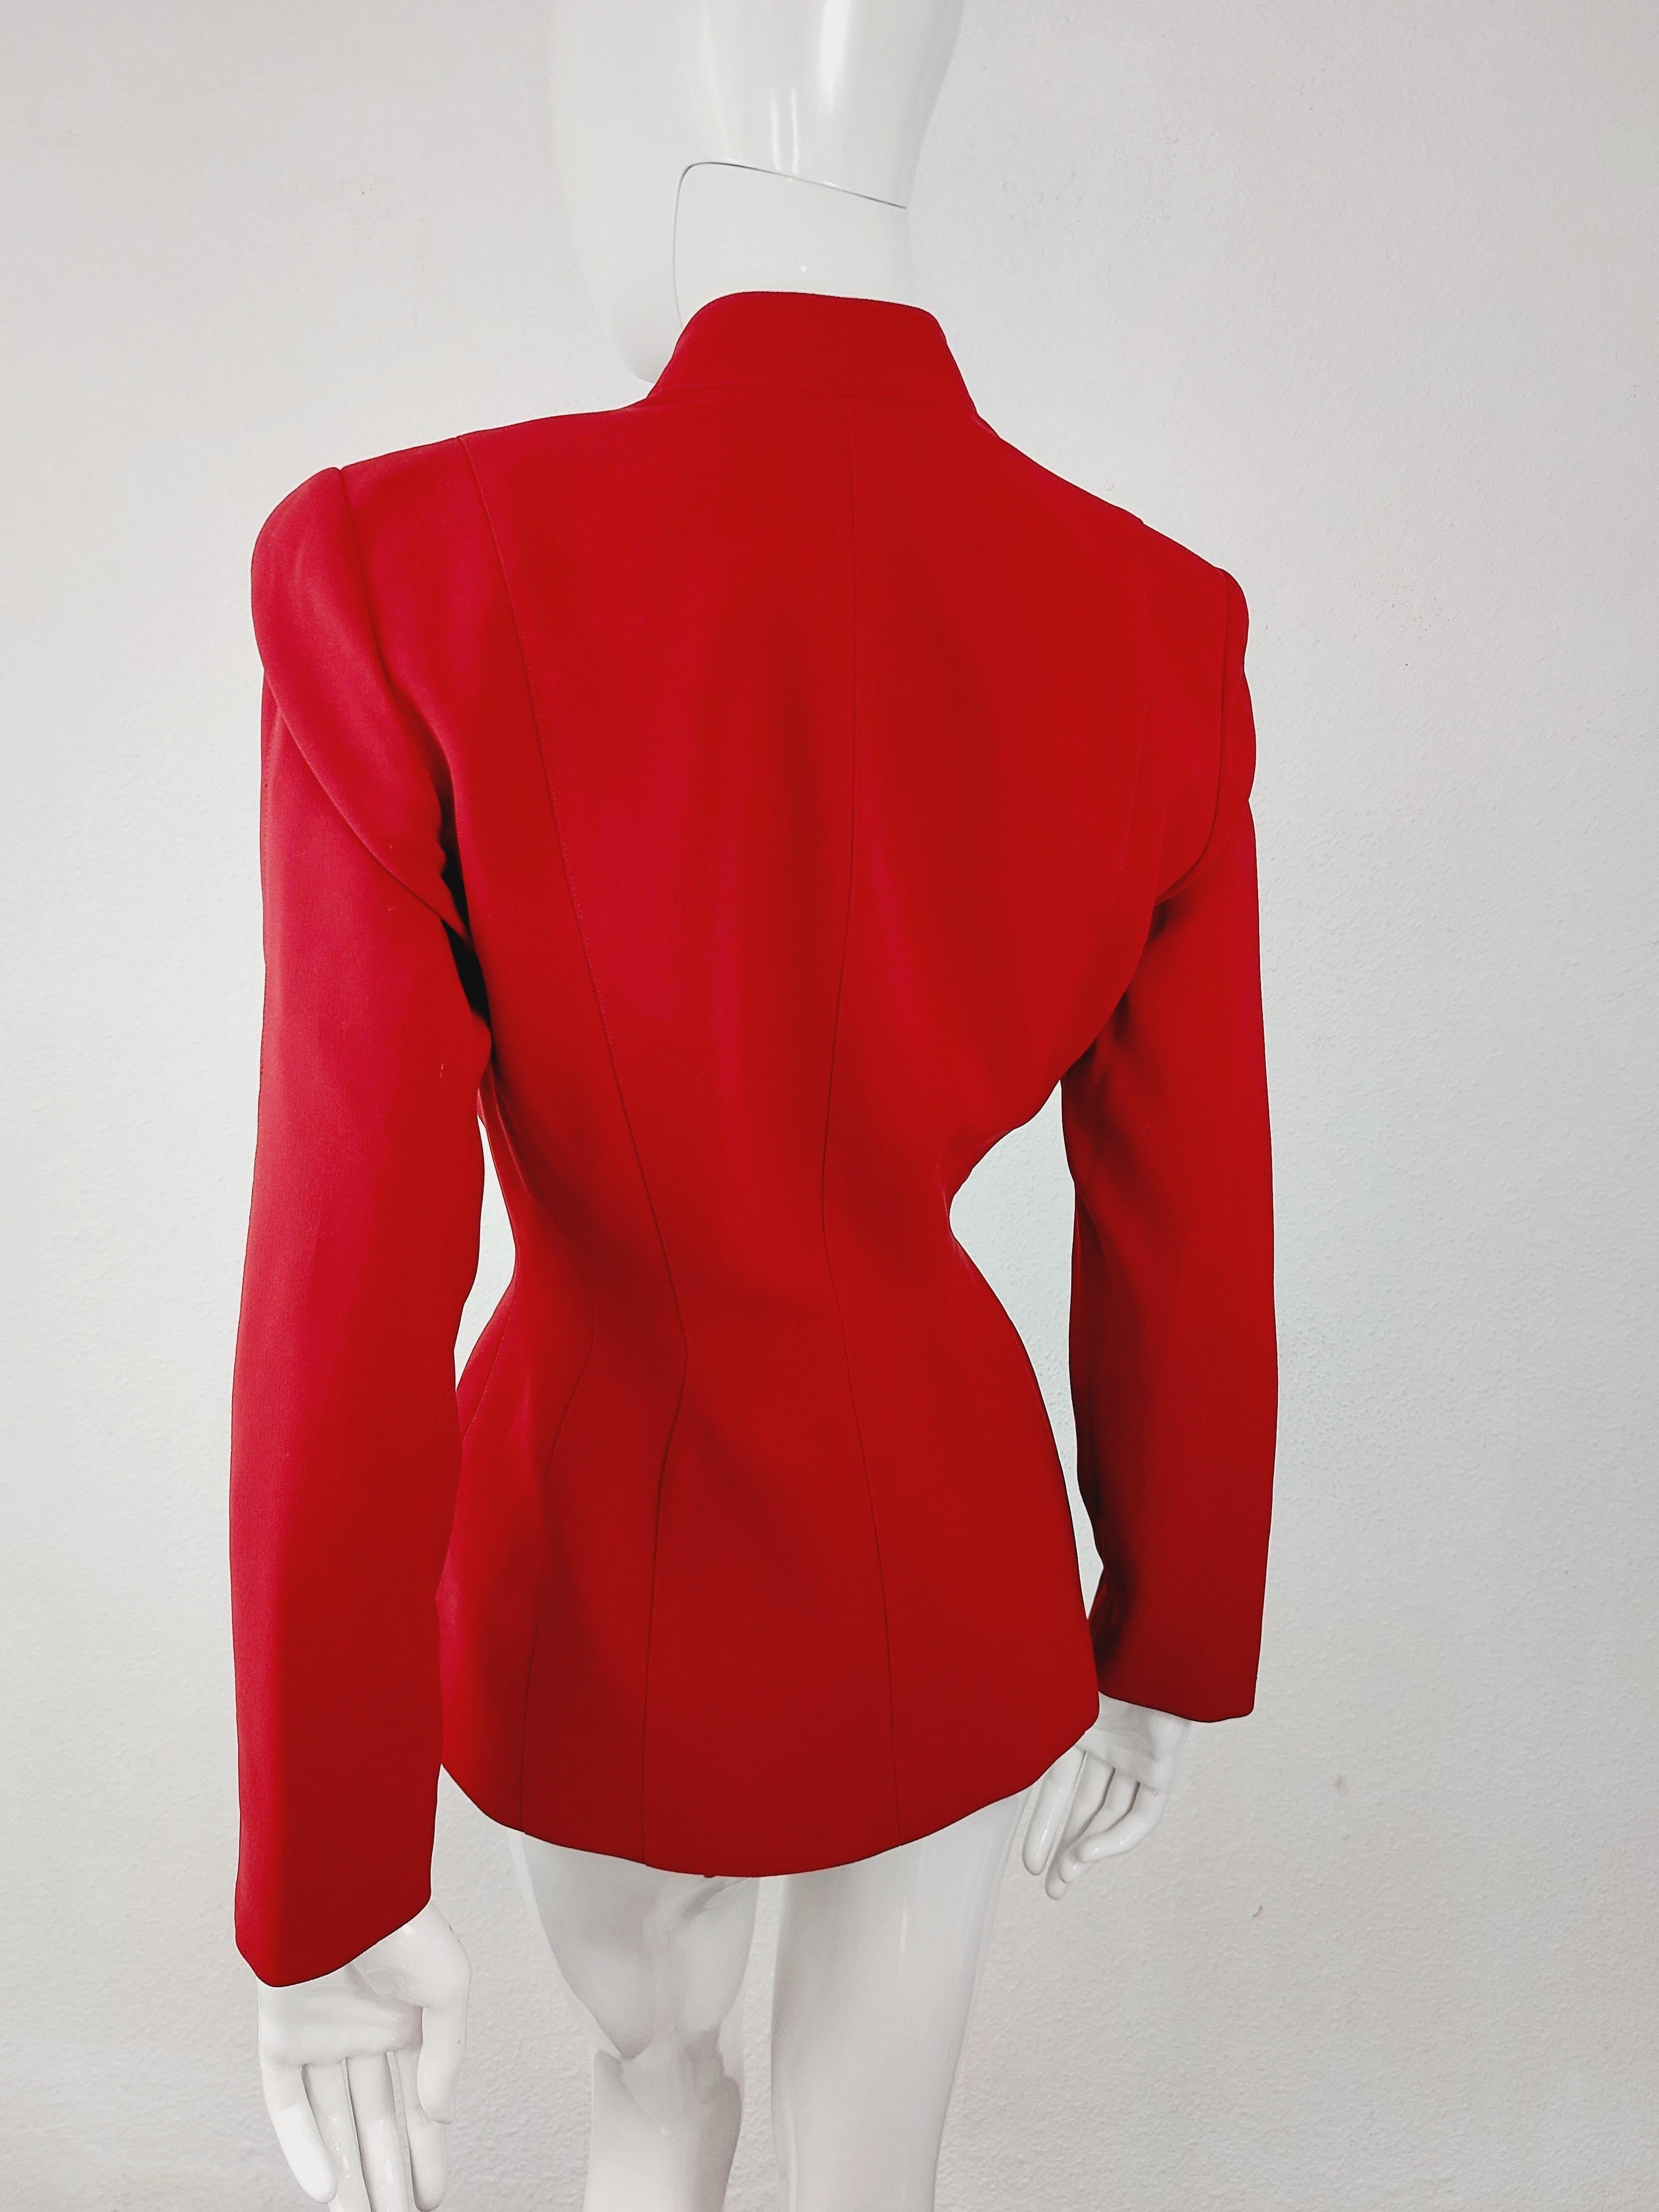 Thierry Mugler Couture 2000 AW Sculptural Red Wasp Pin Brooch Jacket Blazer 7